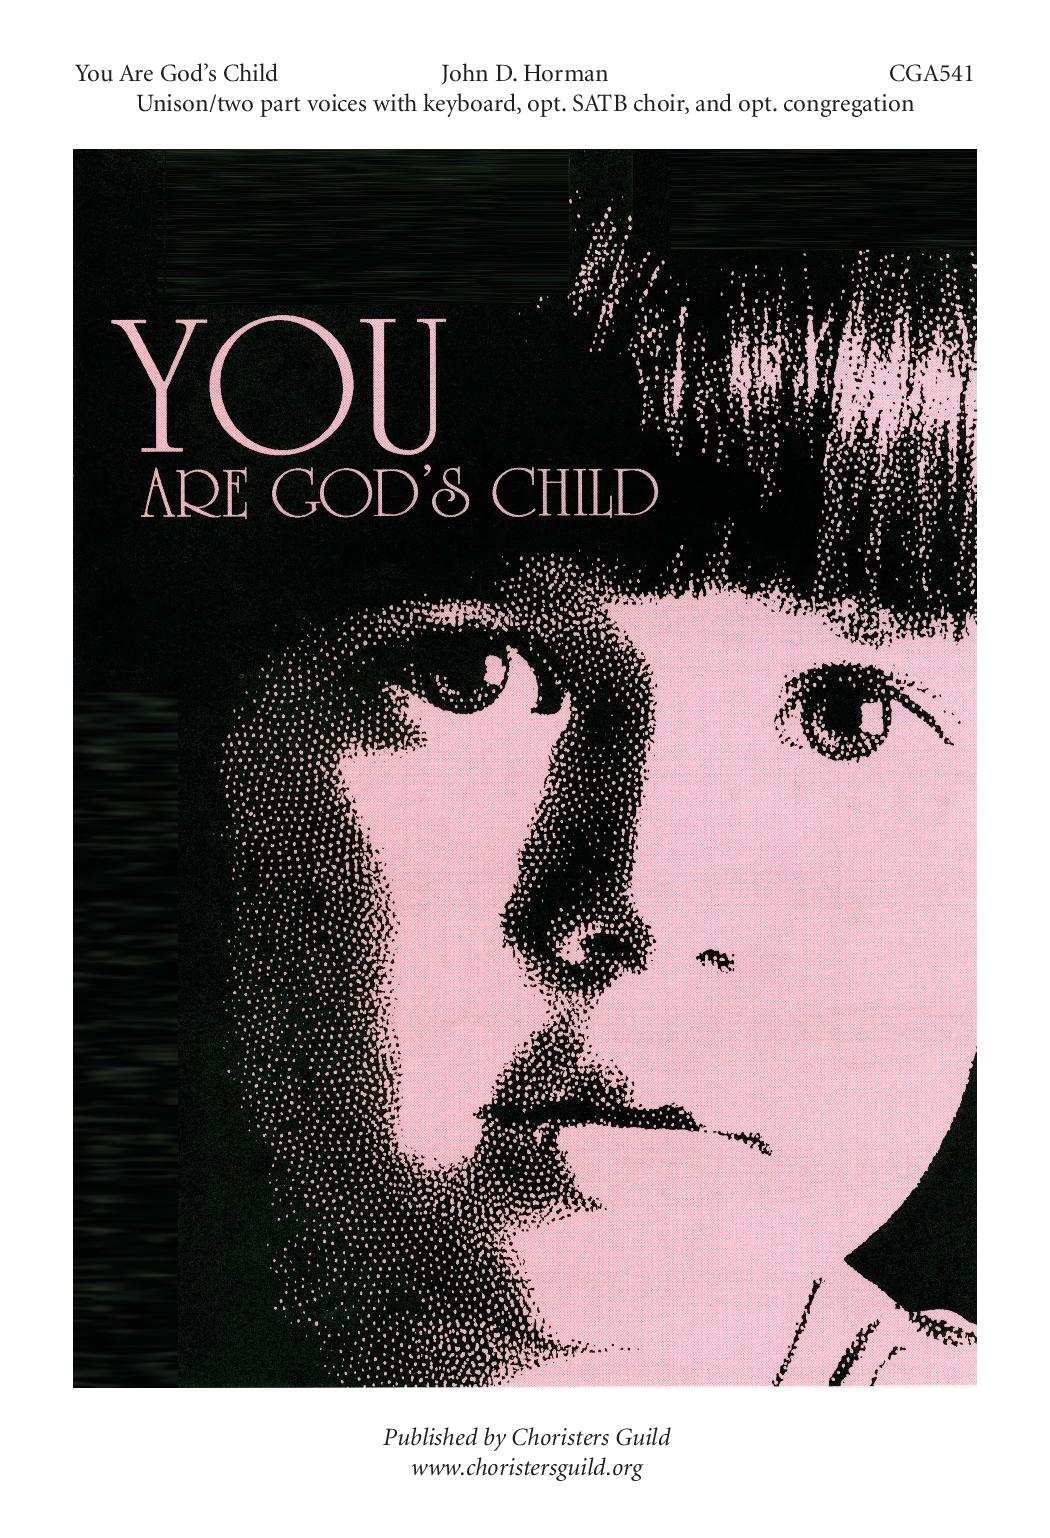 You Are God's Child